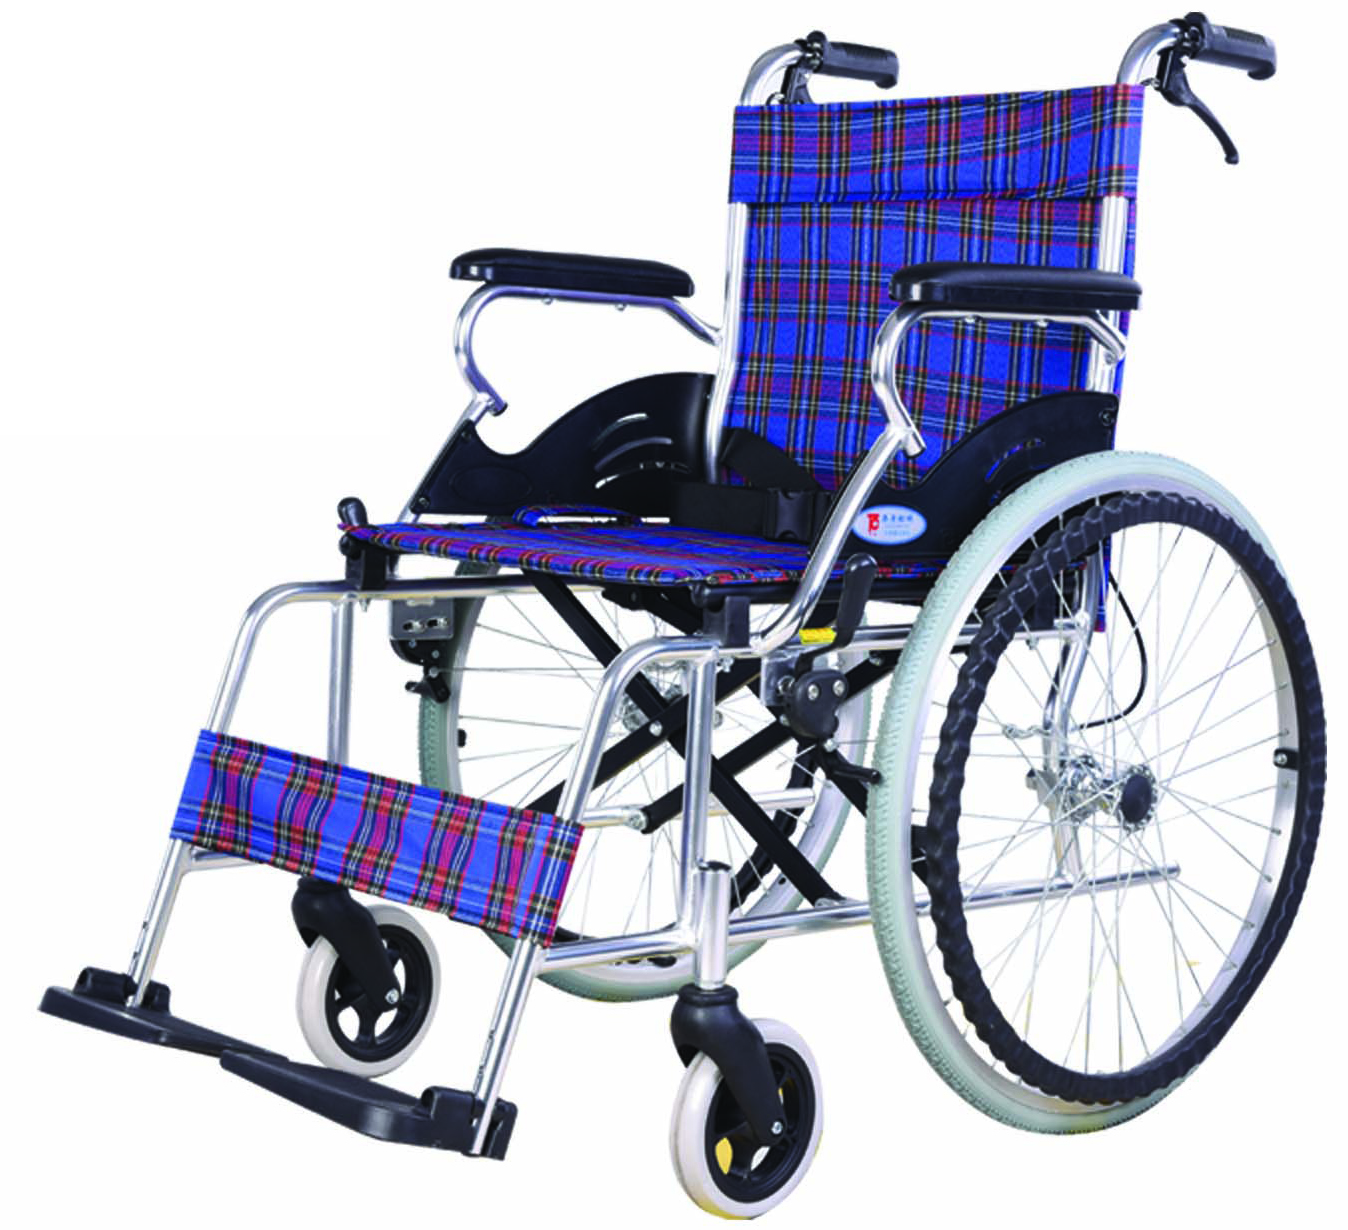 How to help customers choose a wheelchair from a professional point of view